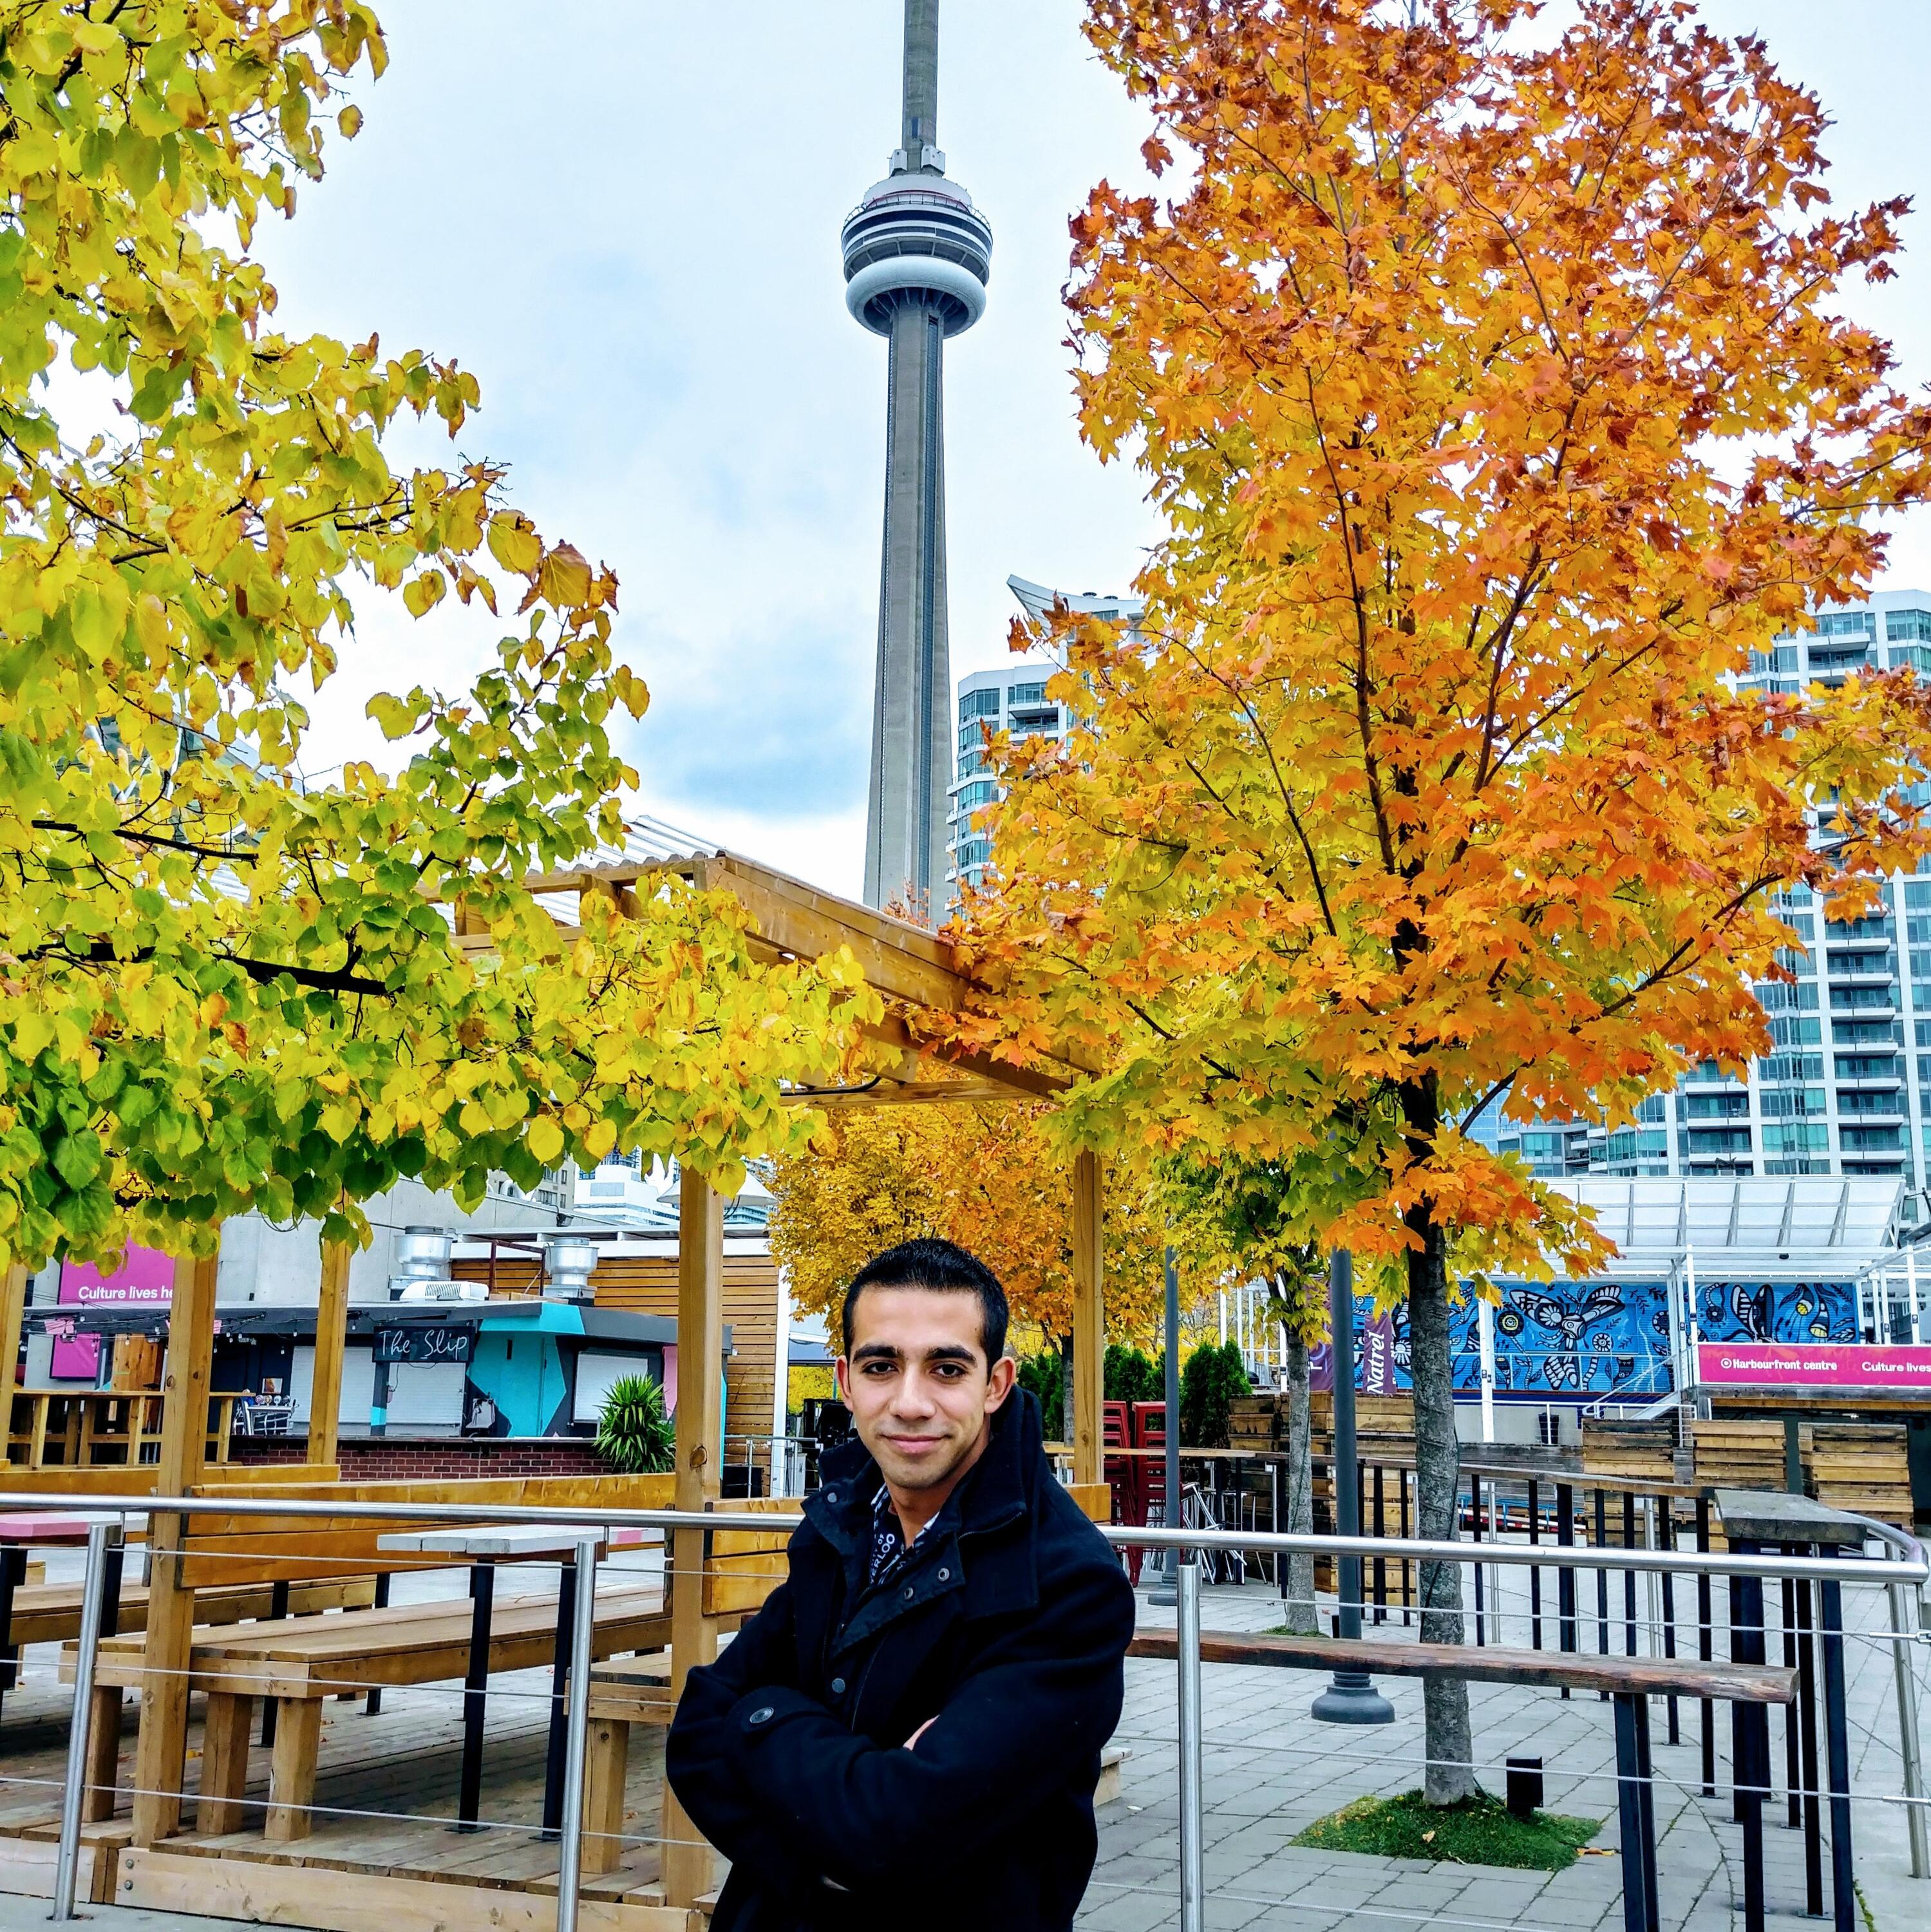 Marco standing in front of the CN tower